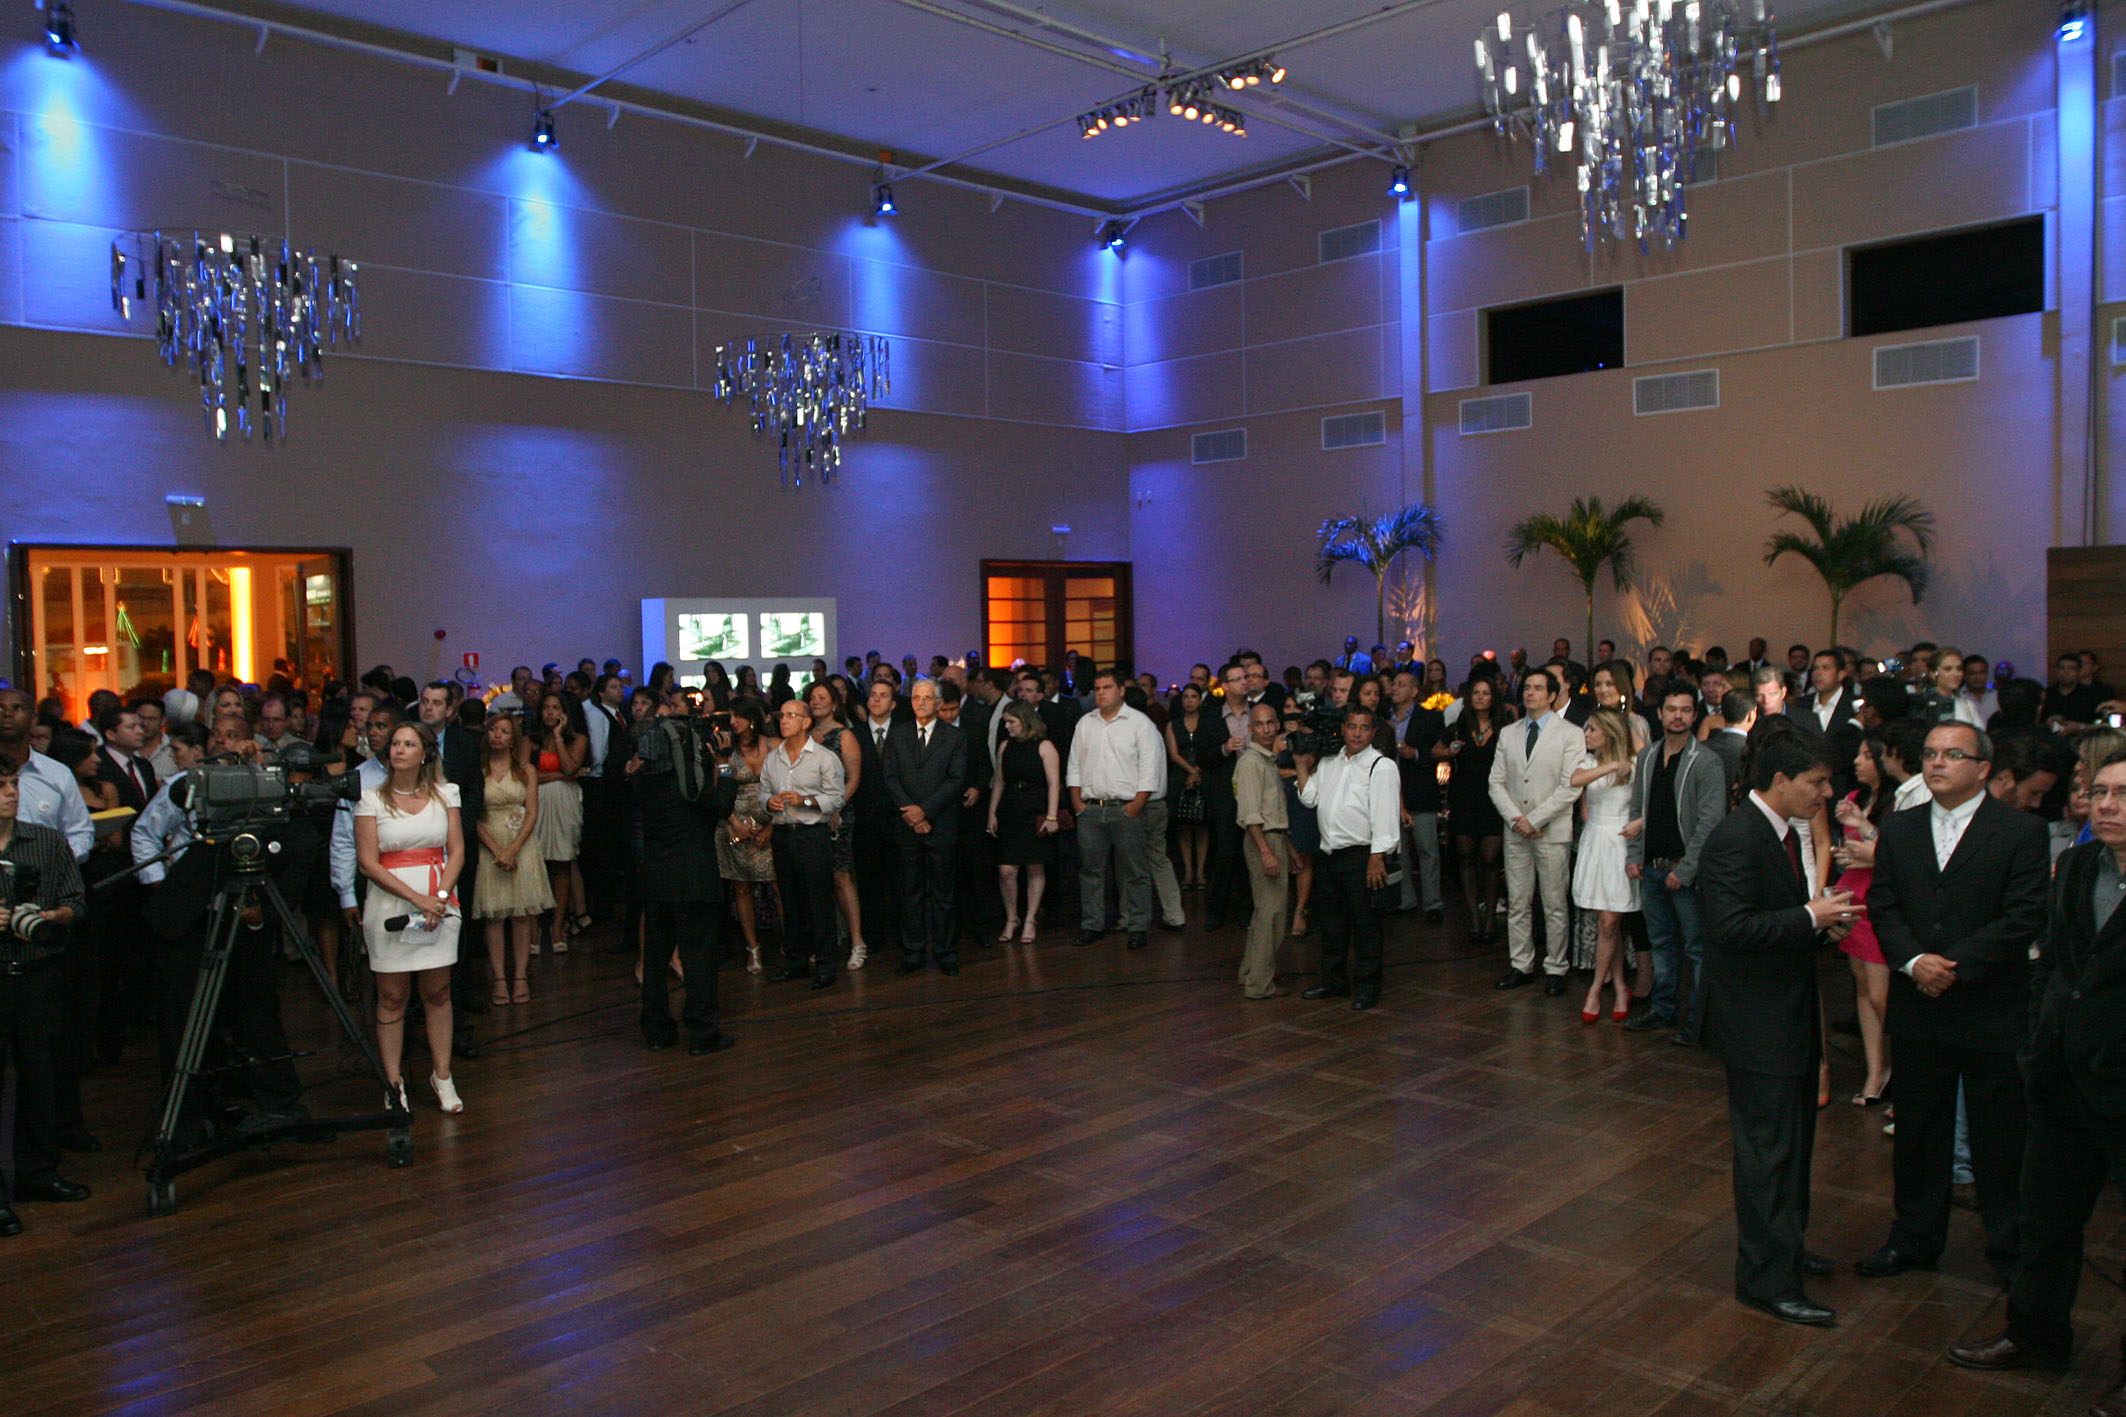 large gathering of people standing around in an indoor ballroom